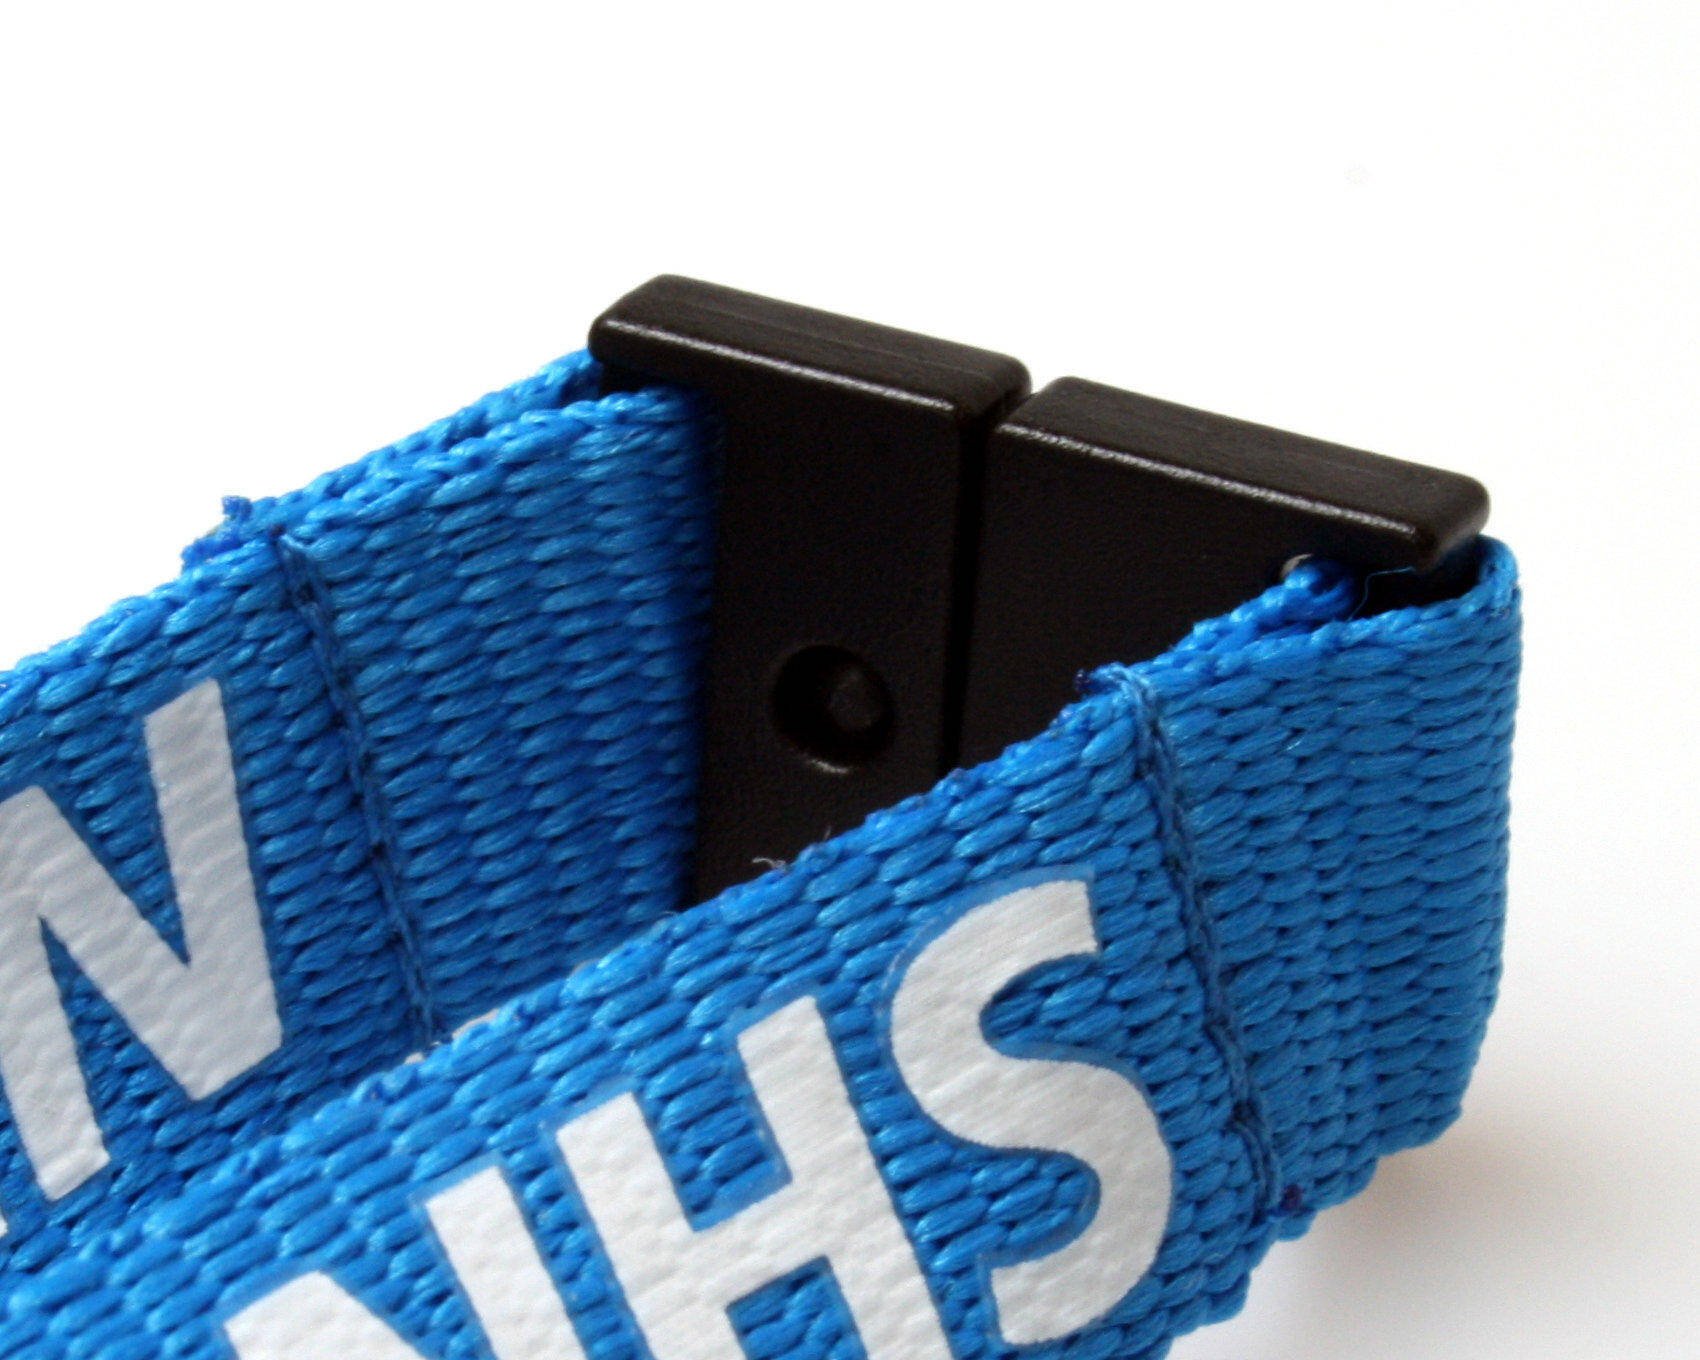 NHS Lanyard Neck Strap With Integrated Badge Reel And Safety Breakaway Mechanism 15mm Wide For Work, Staff, Nurse, Hospitals 100